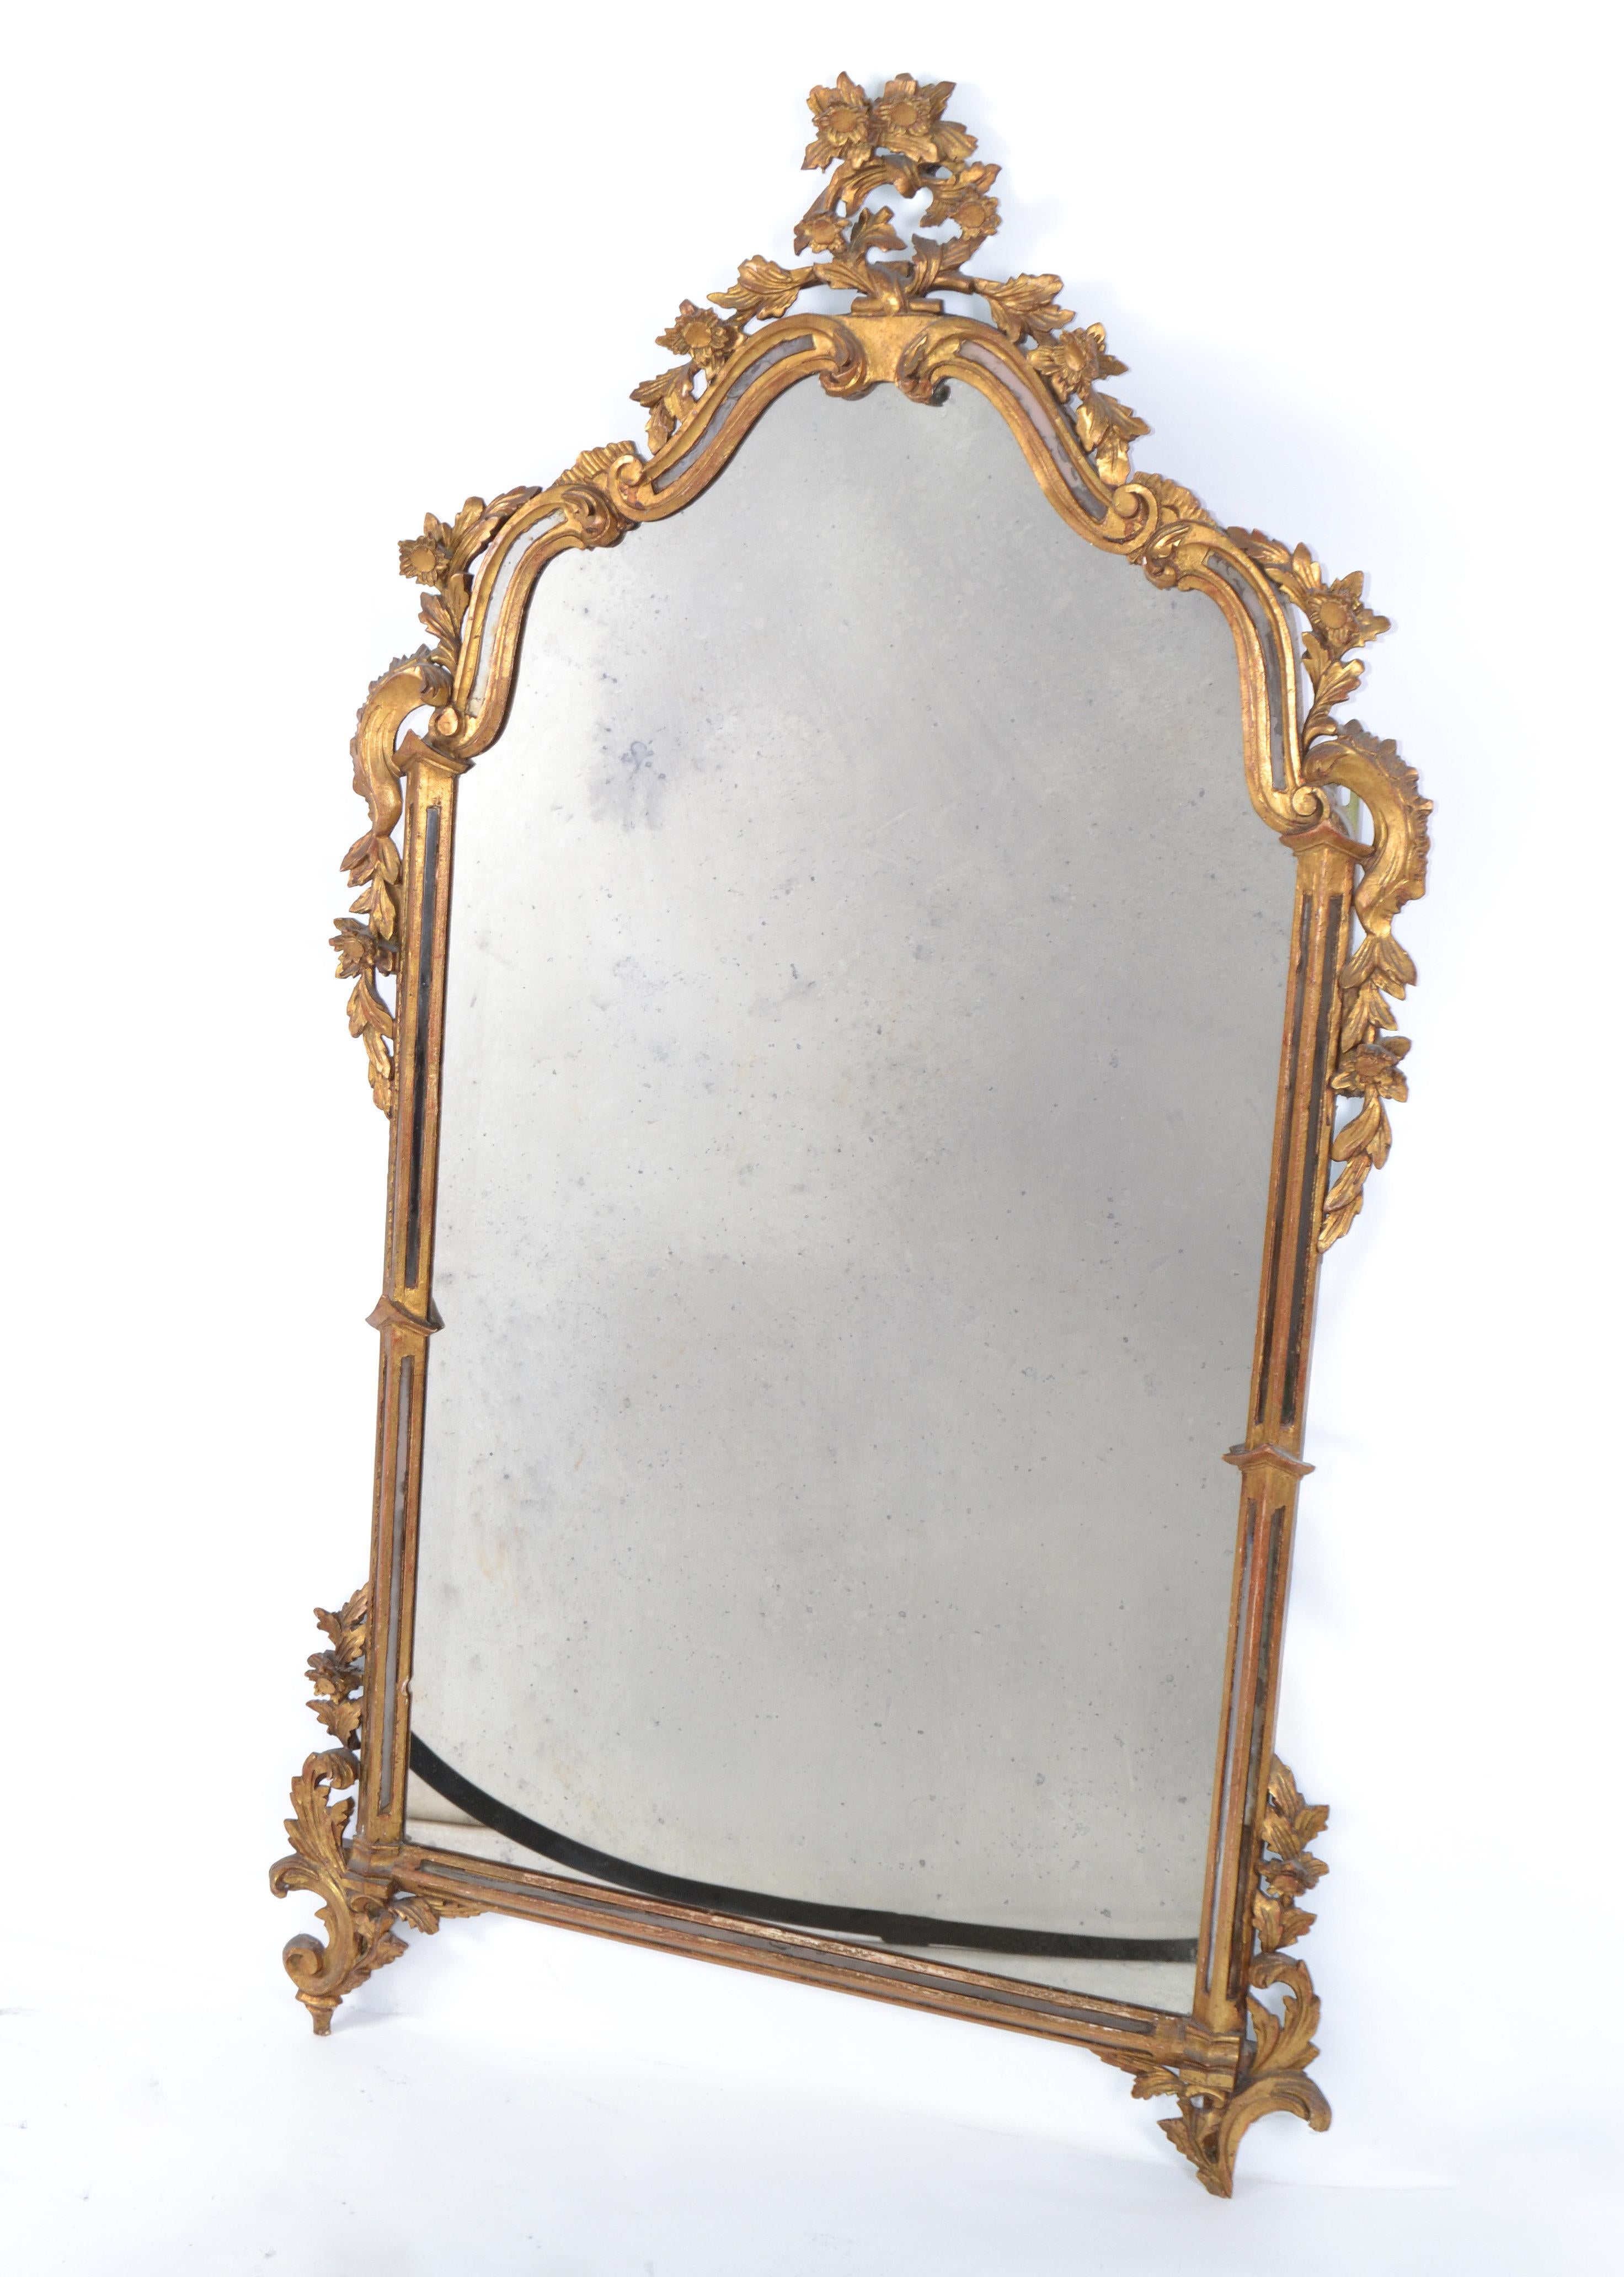 Baroque Italian Florentine Hand Carved Giltwood and Antique Mirrored Glass Wall Mirror